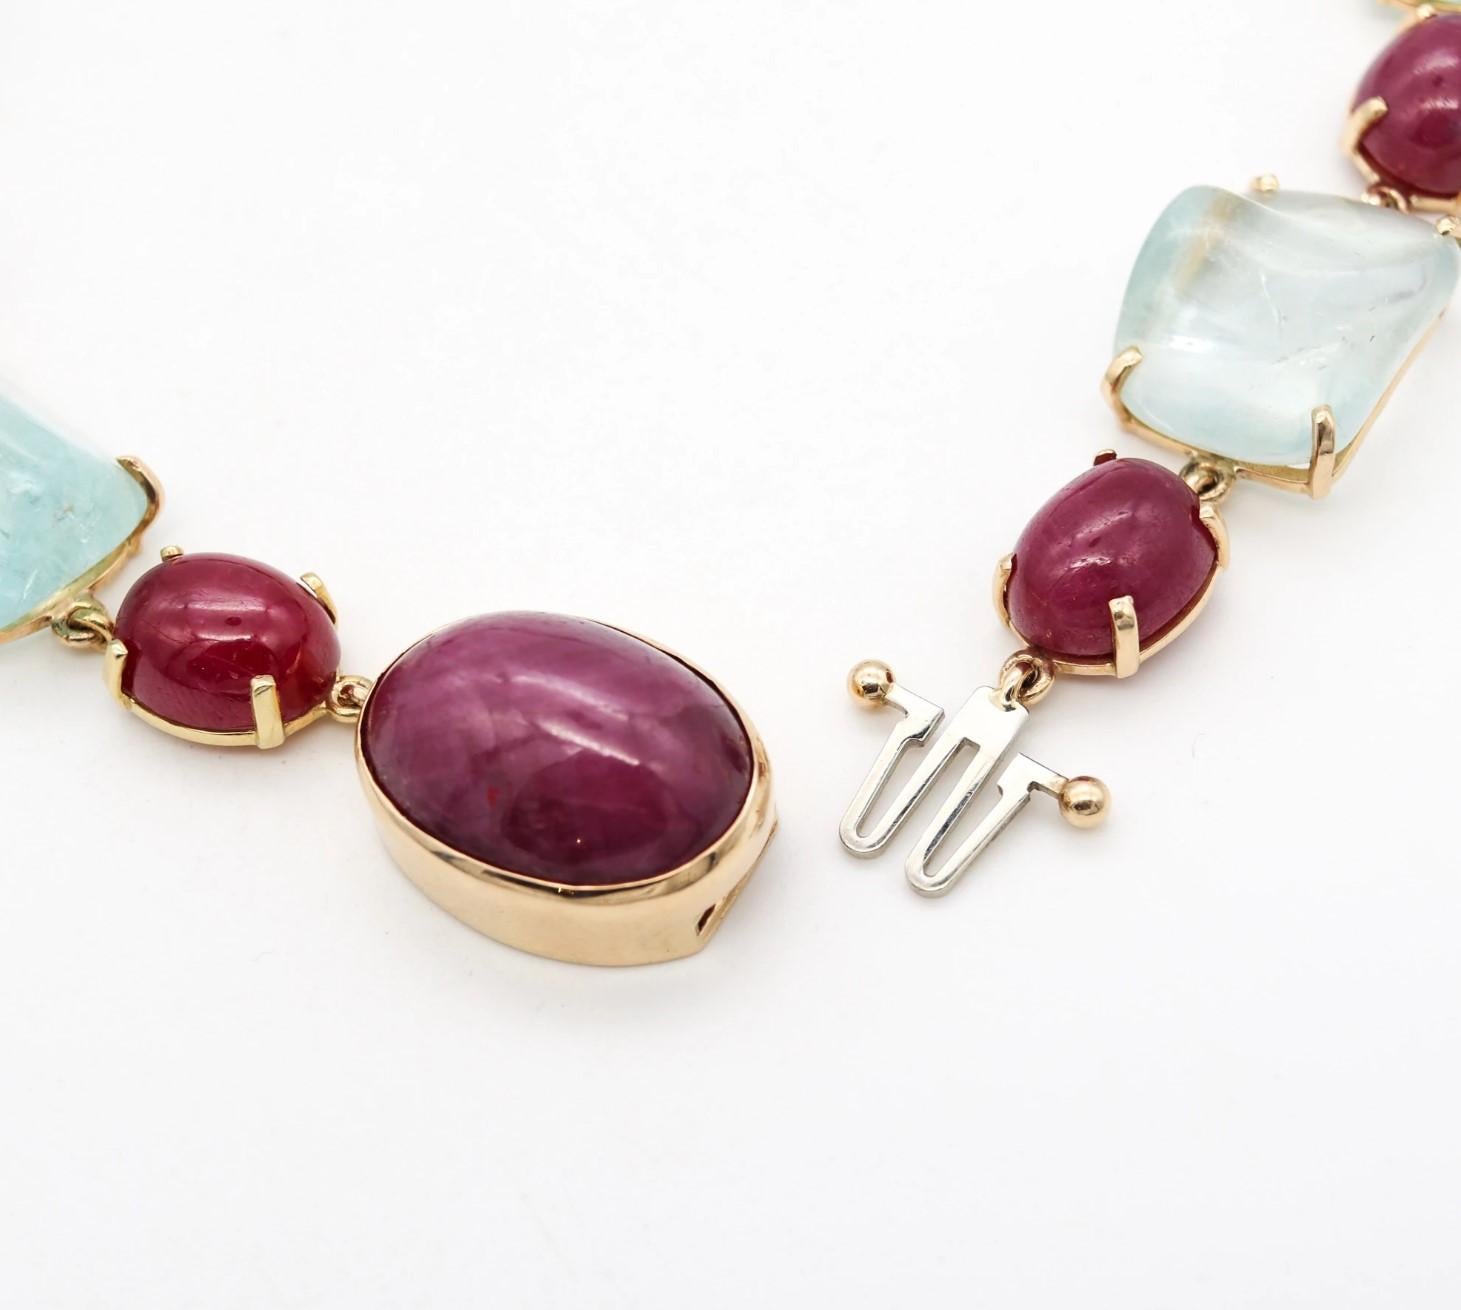 Mixed Cut Seaman Schepps 1970 Retro Necklace 14Kt Gold with 384.37 Ctw Rubies & Aquamarine For Sale